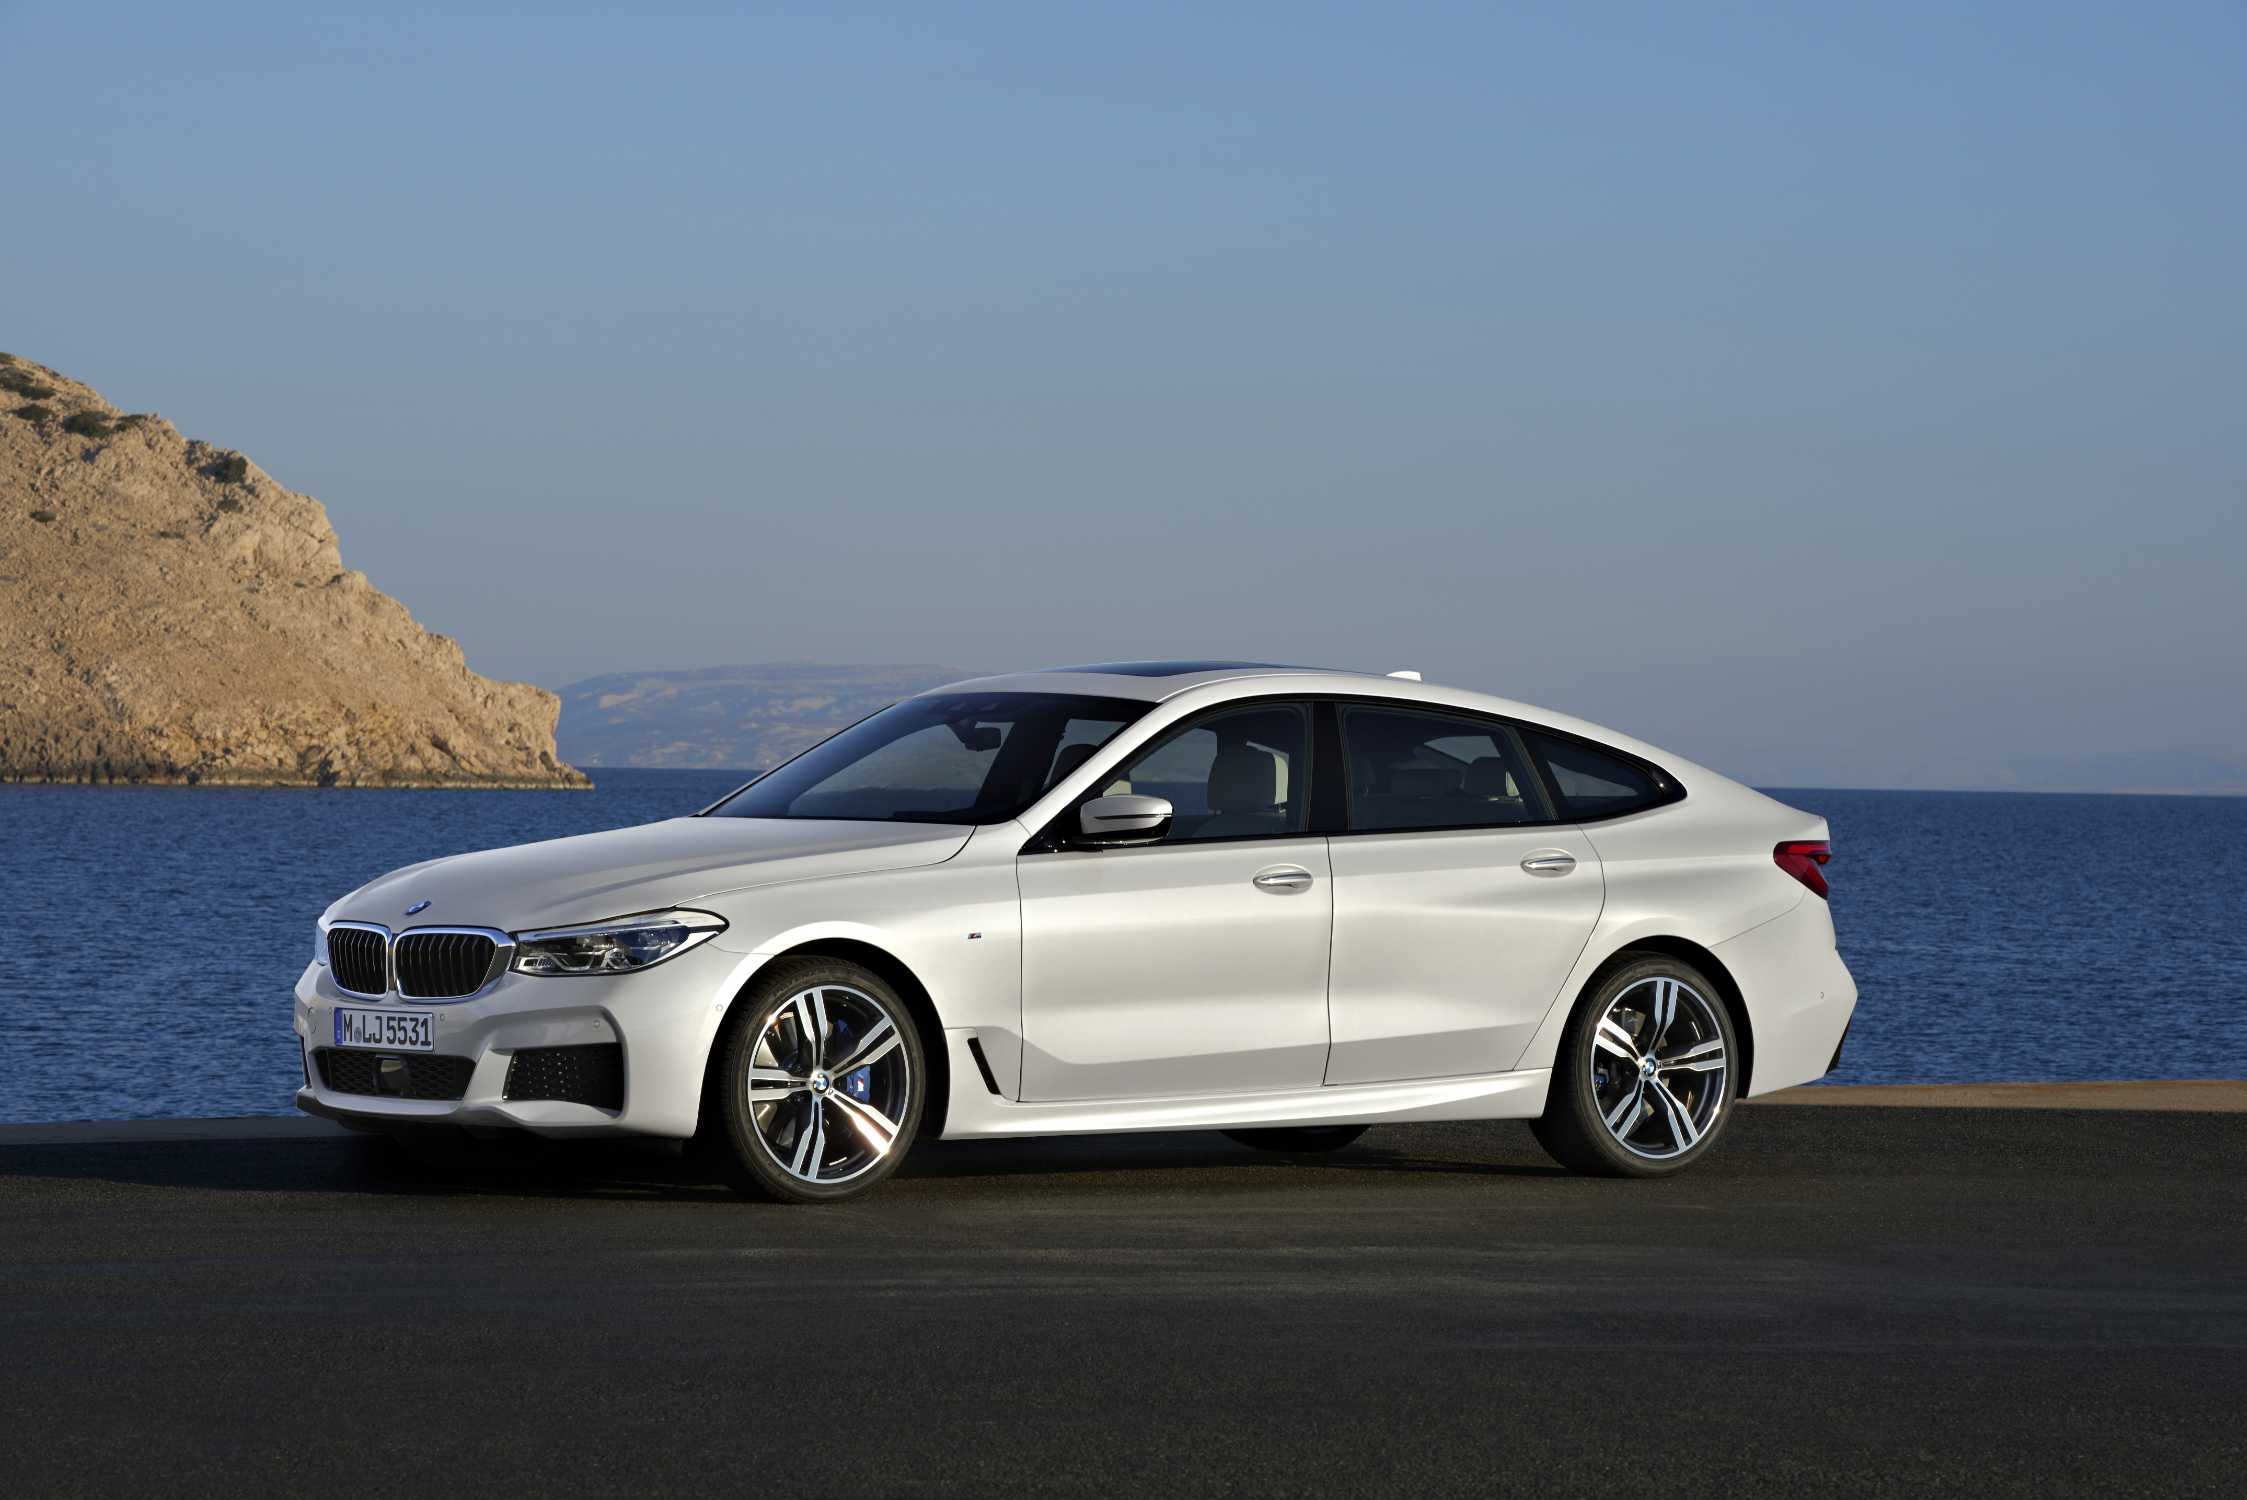 The All-New 2018 BMW 6 Series Gran Turismo.